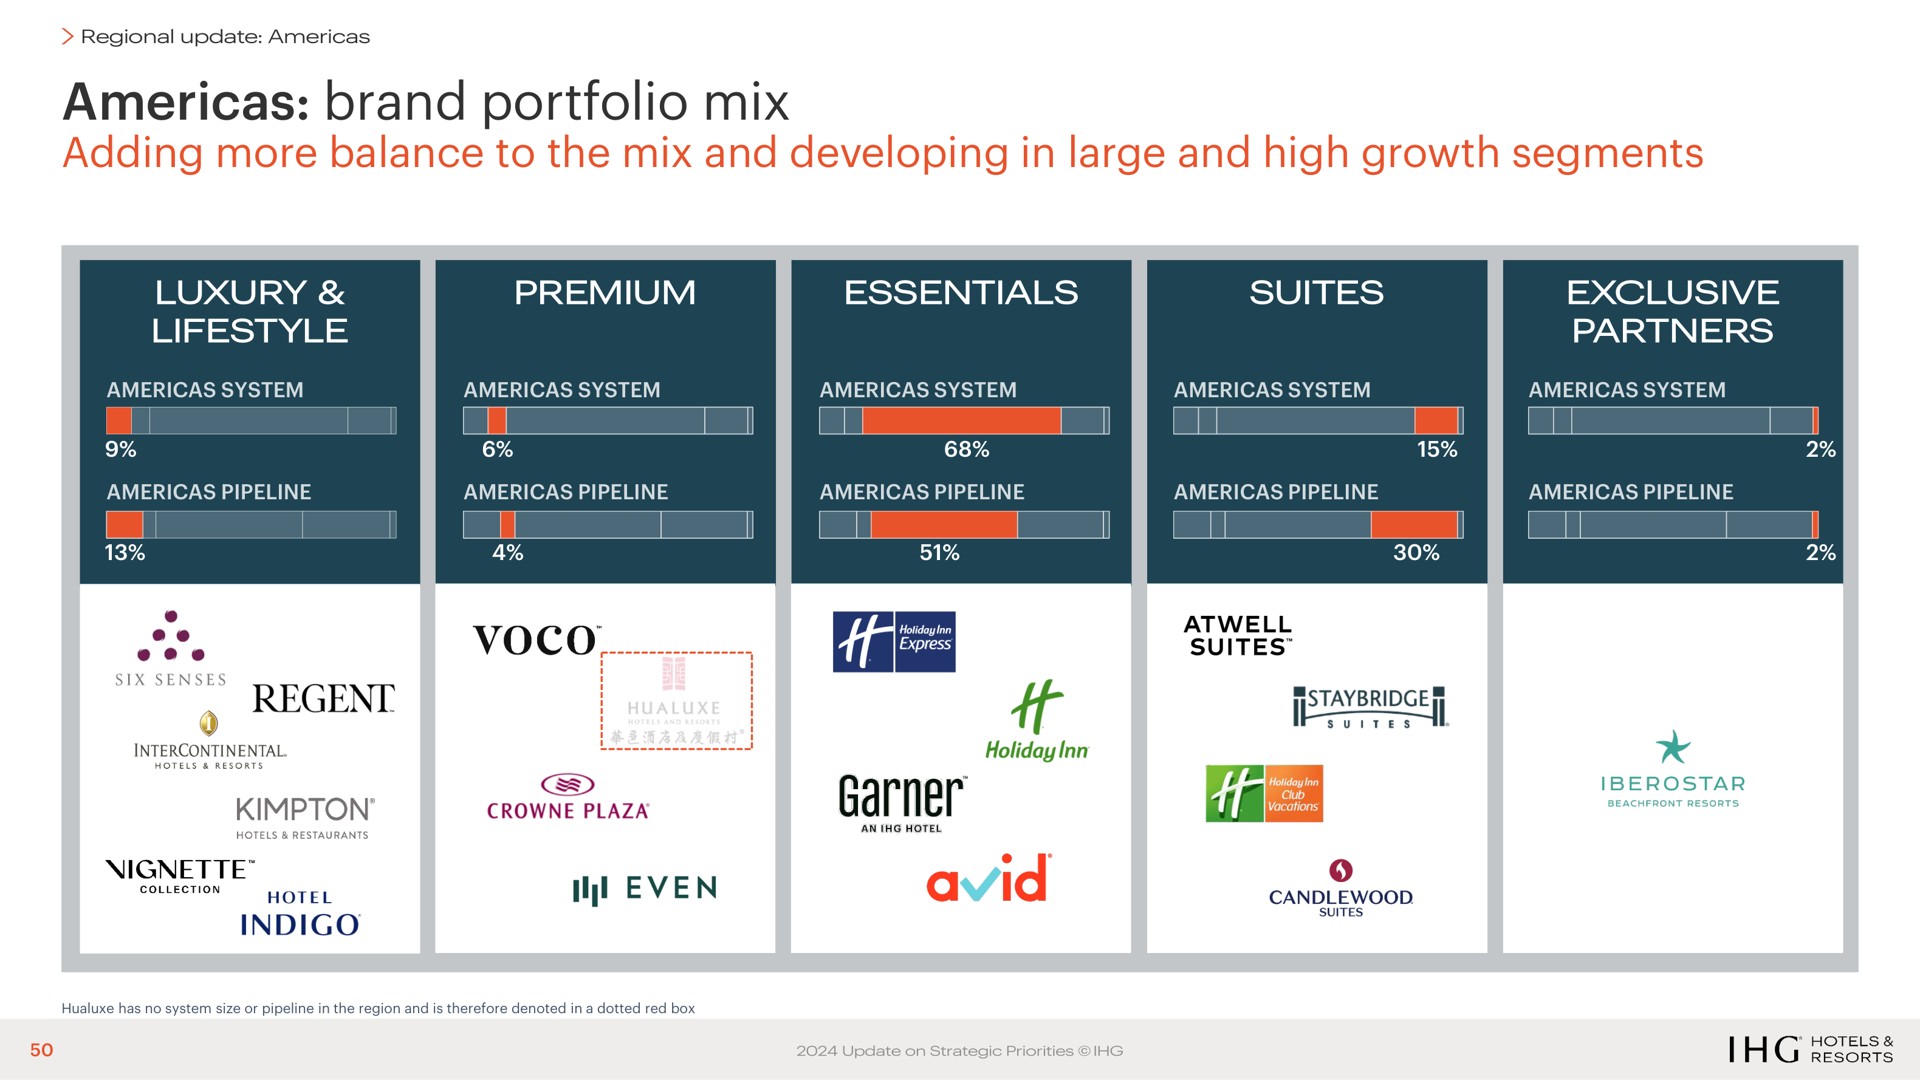 brand portfolio mix adding more balance to the mix and developing in large and high growth segments even garner avid a | IHG Hotels